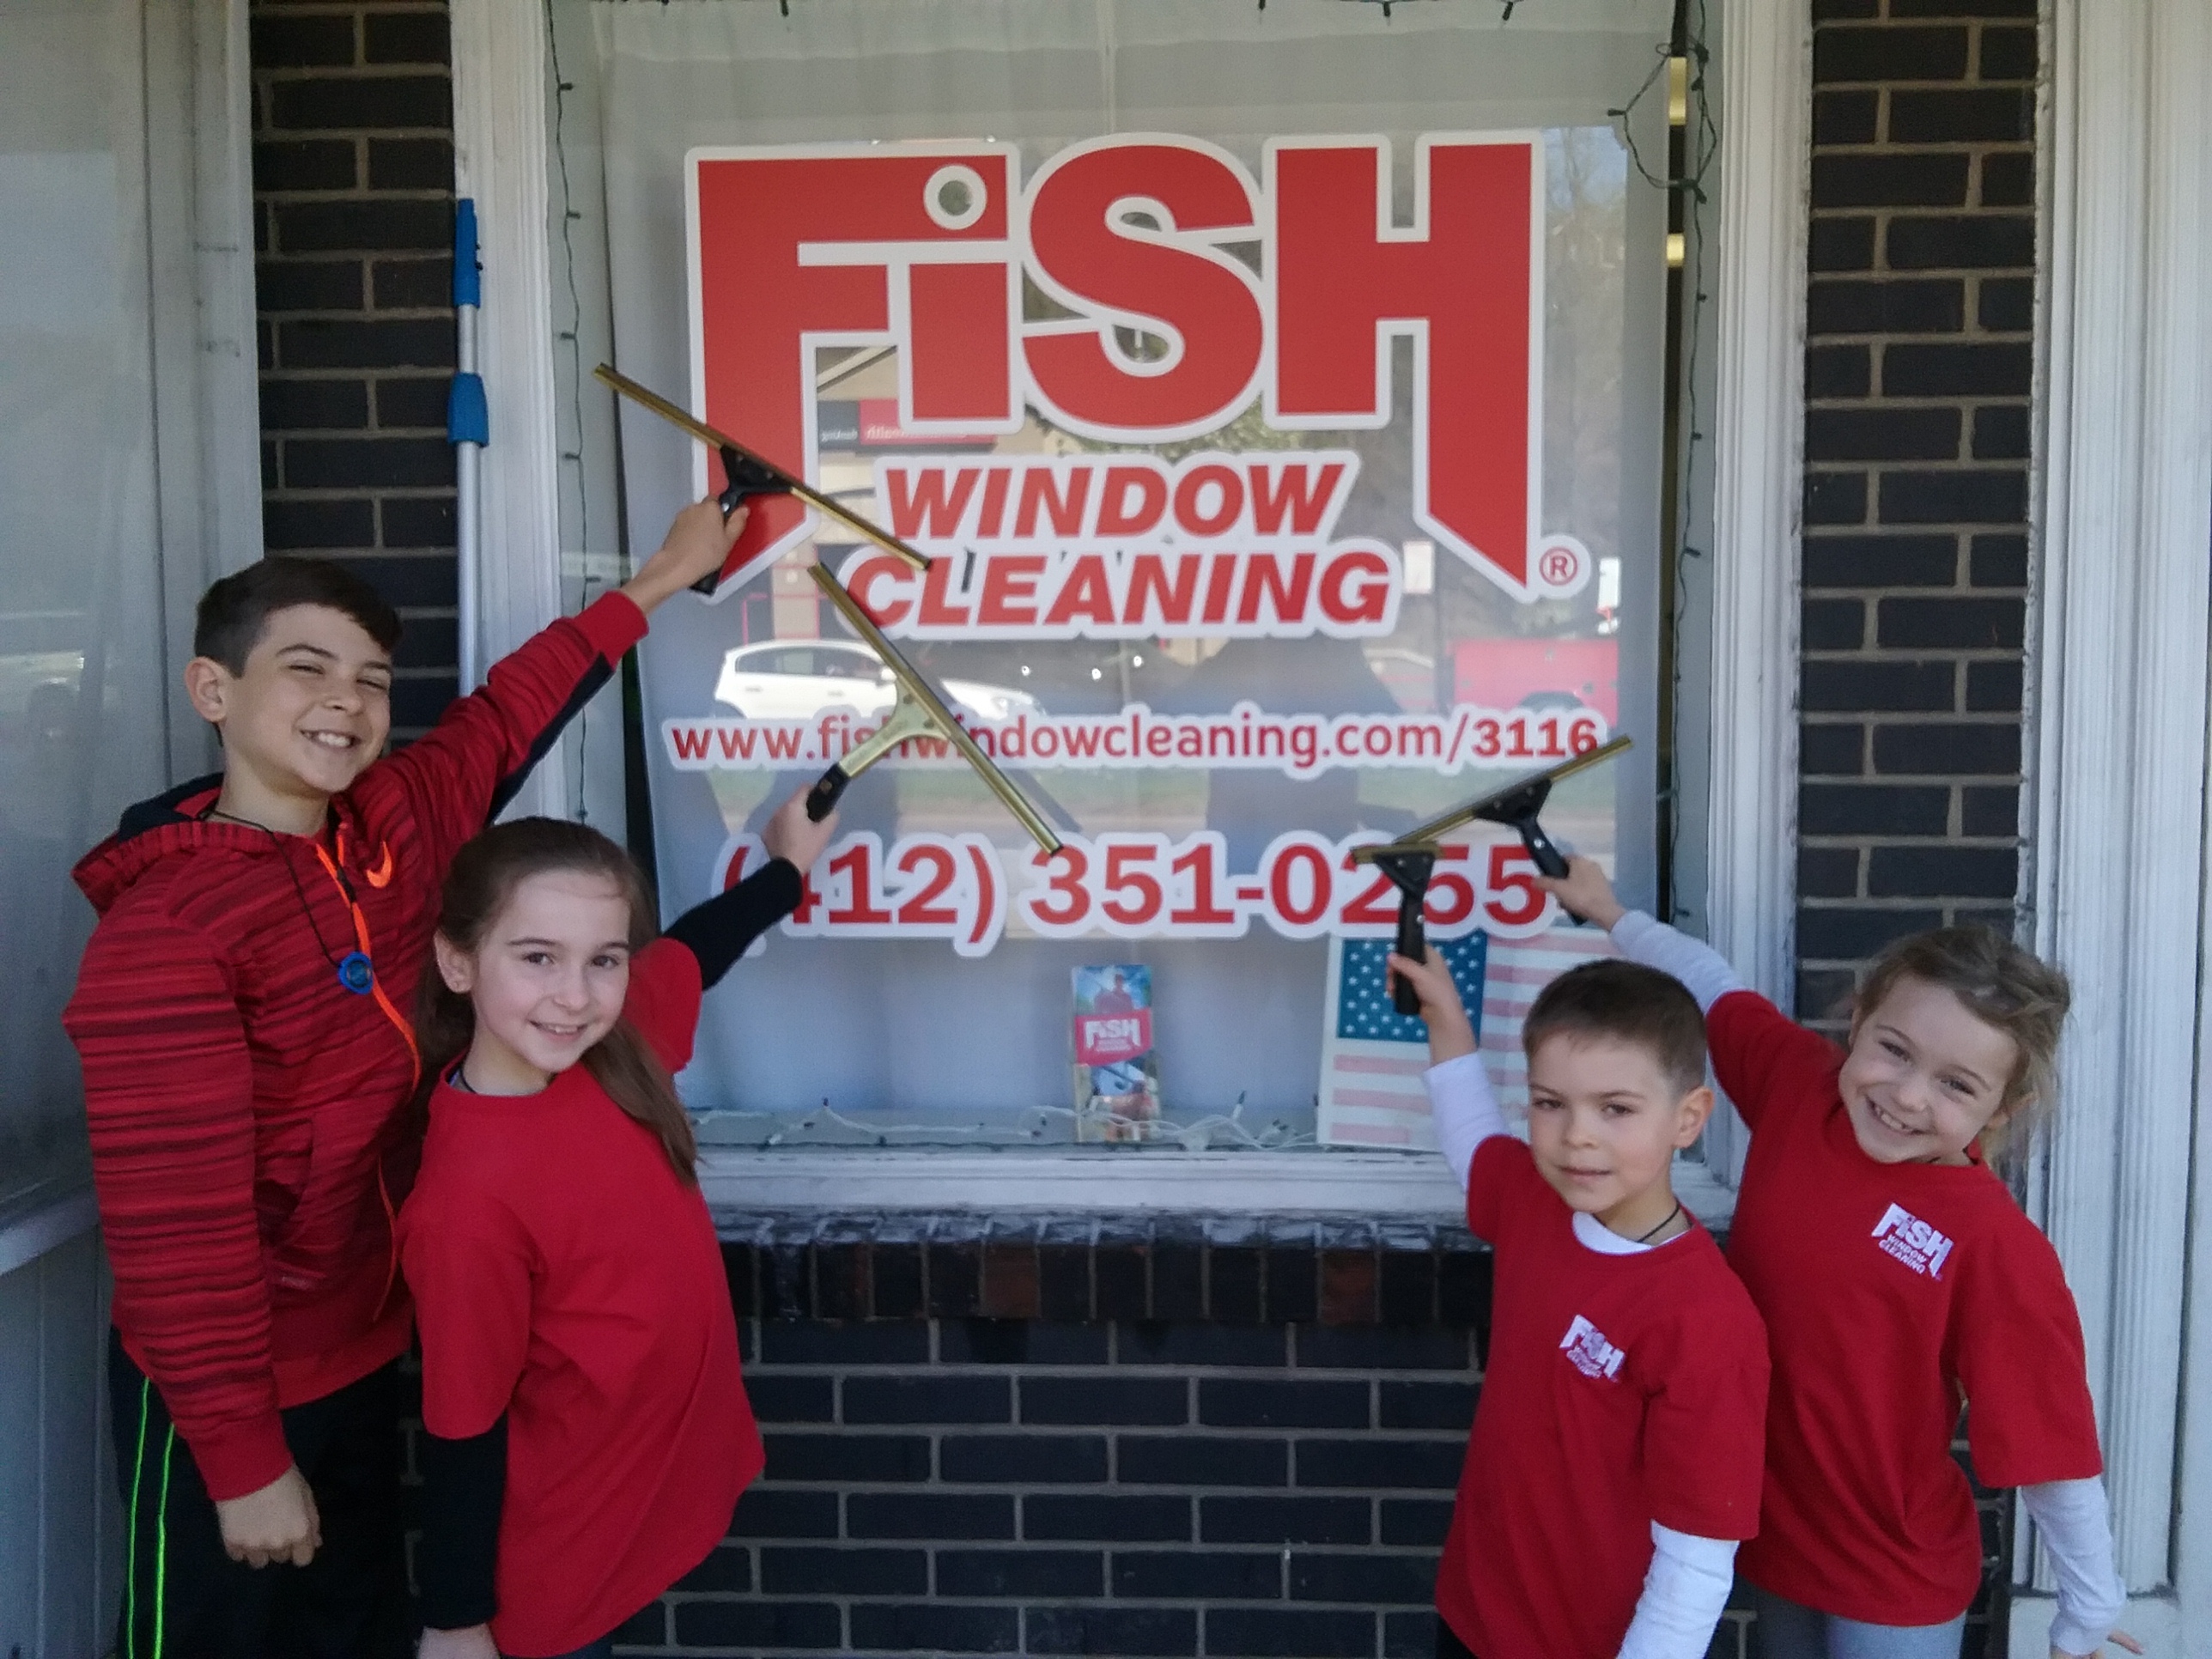 Fish Window Cleaning Squirrel Hill Pa Shadyside Lawrenceville Monroeville Penn Hills Oakmont Forest Hills Wilkinsburg Edgewood Swissvale Verona North Braddock Churchill Turtle Creek East Liberty Complete Location List